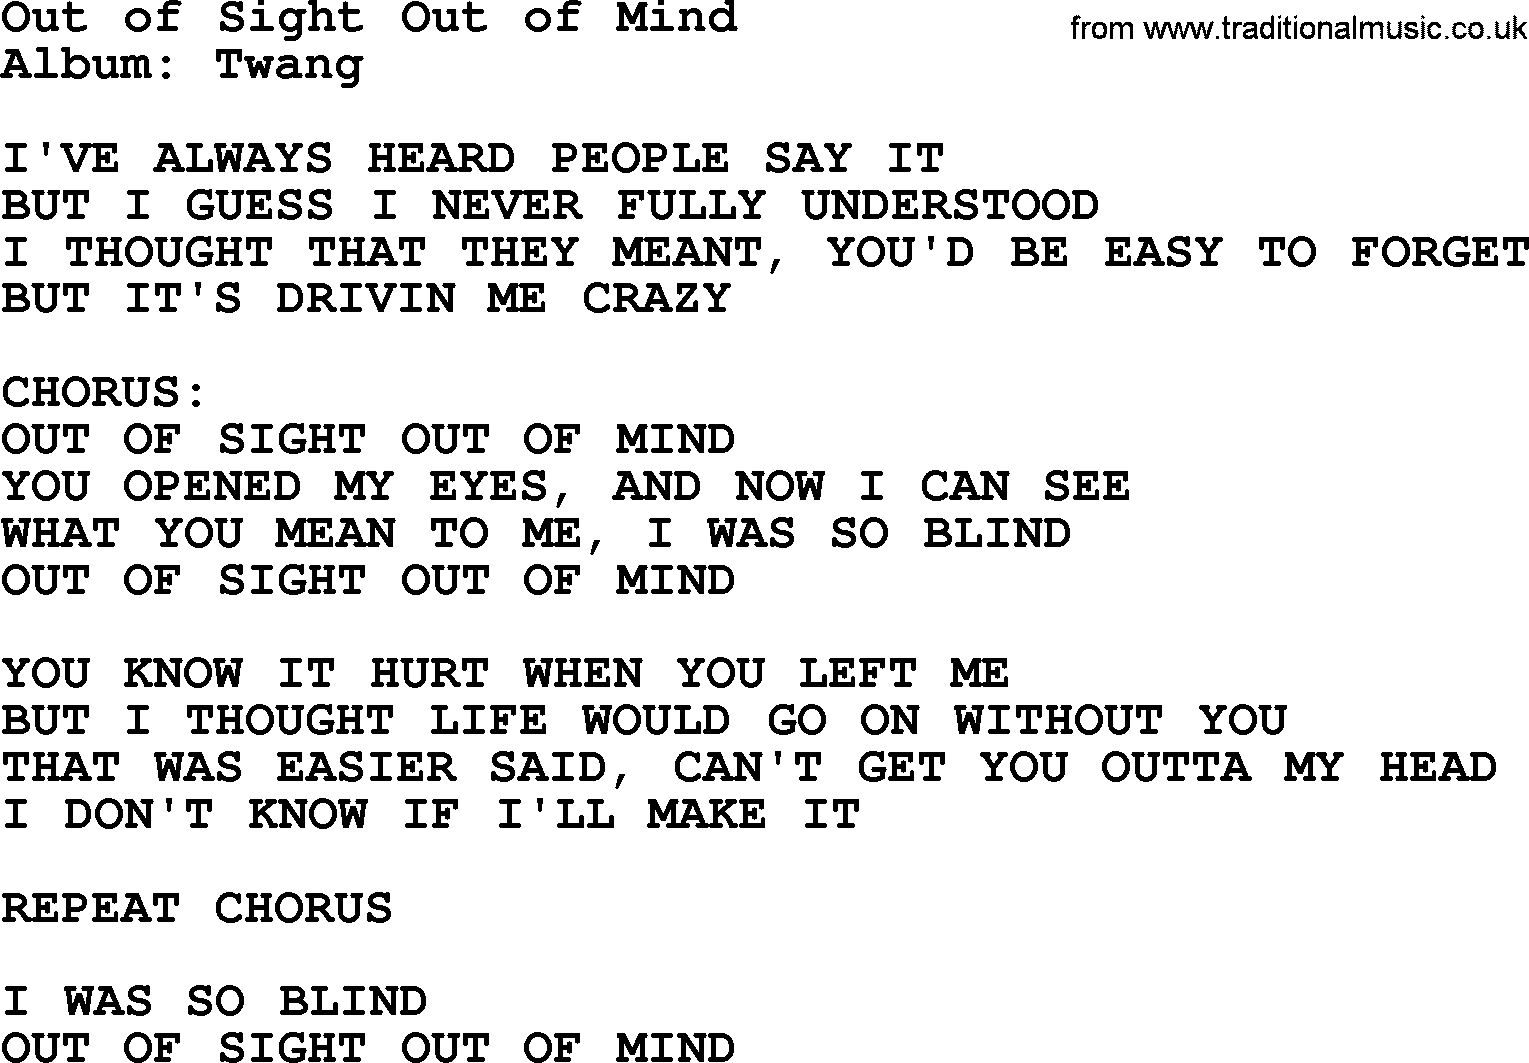 George Strait song: Out of Sight Out of Mind, lyrics